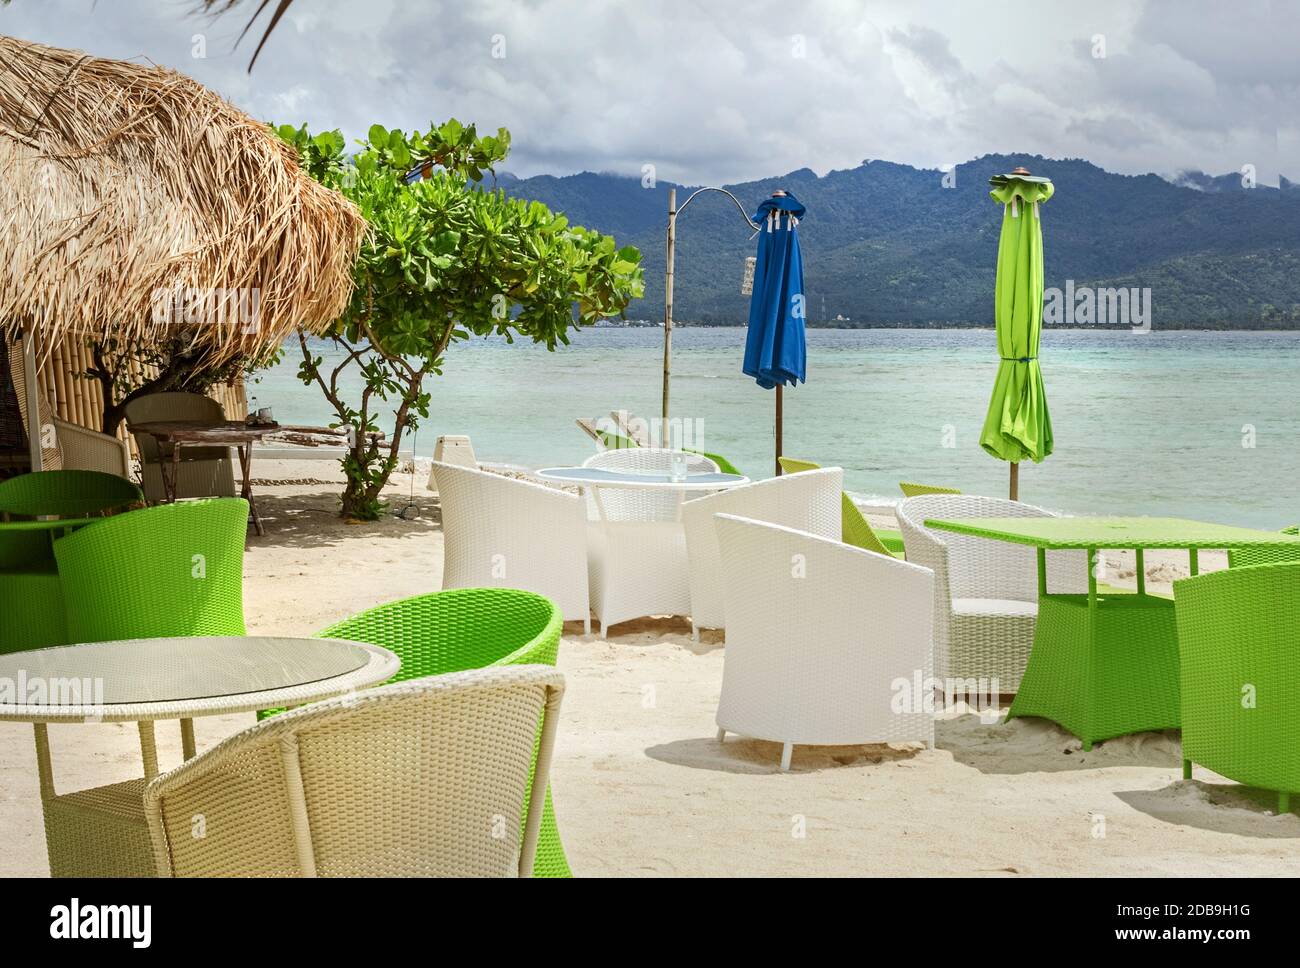 Real deserted cafe on beach at sunny day Stock Photo